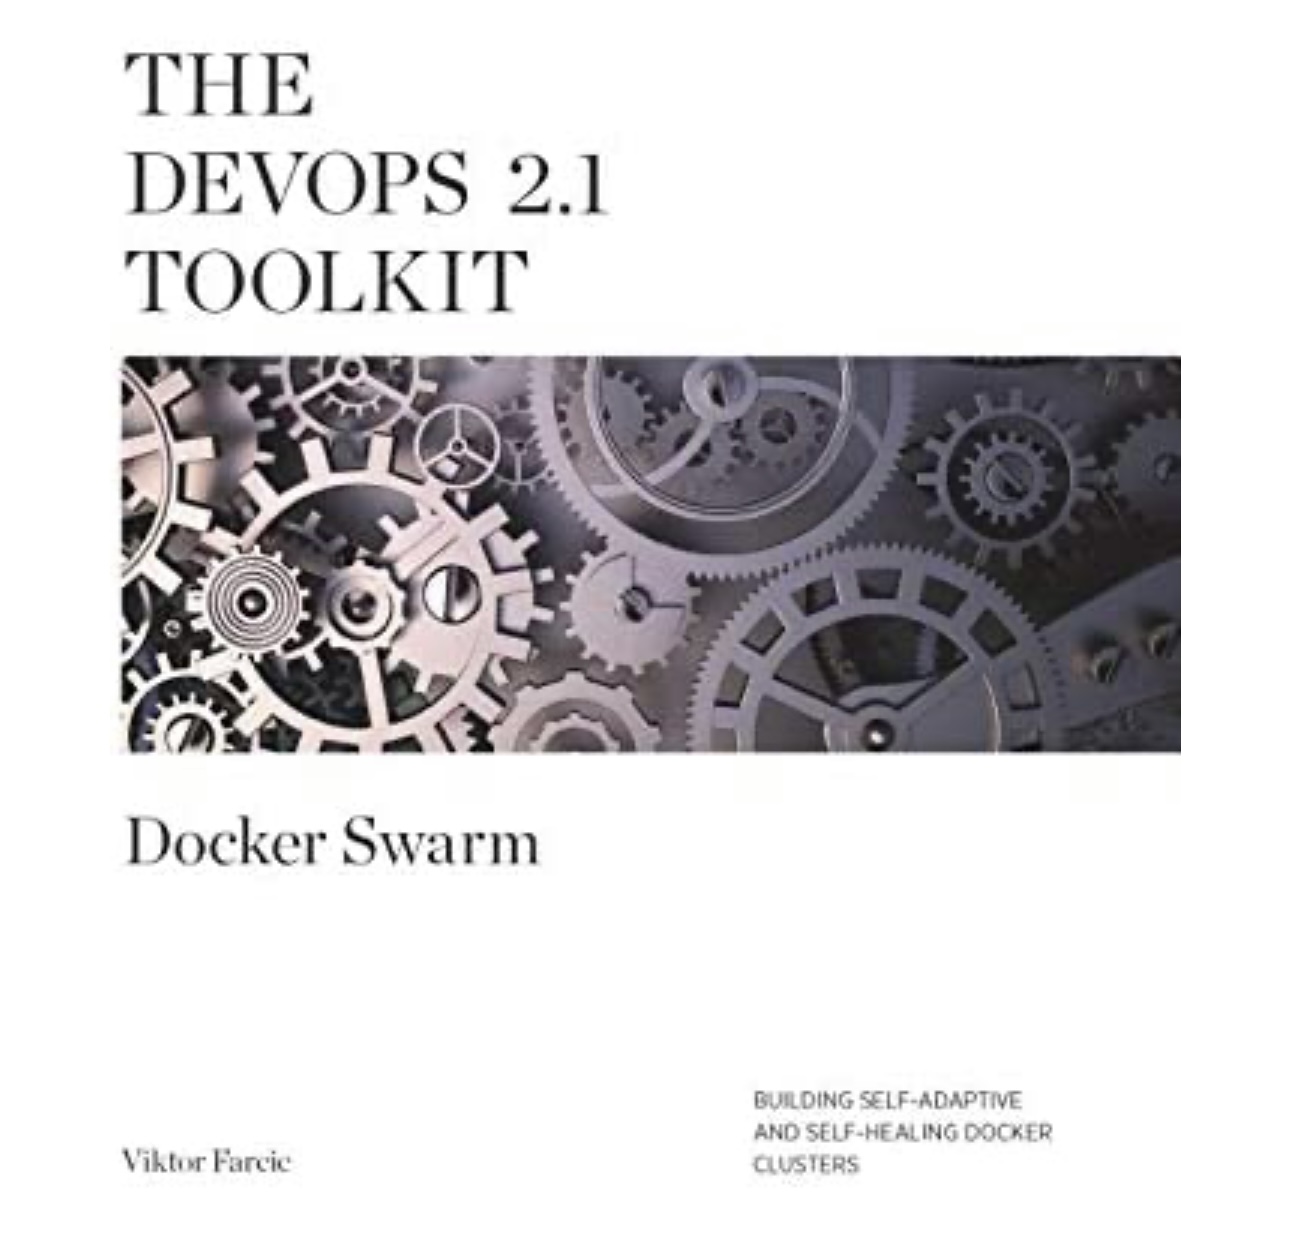 The DevOps 2.1 Toolkit Book Cover